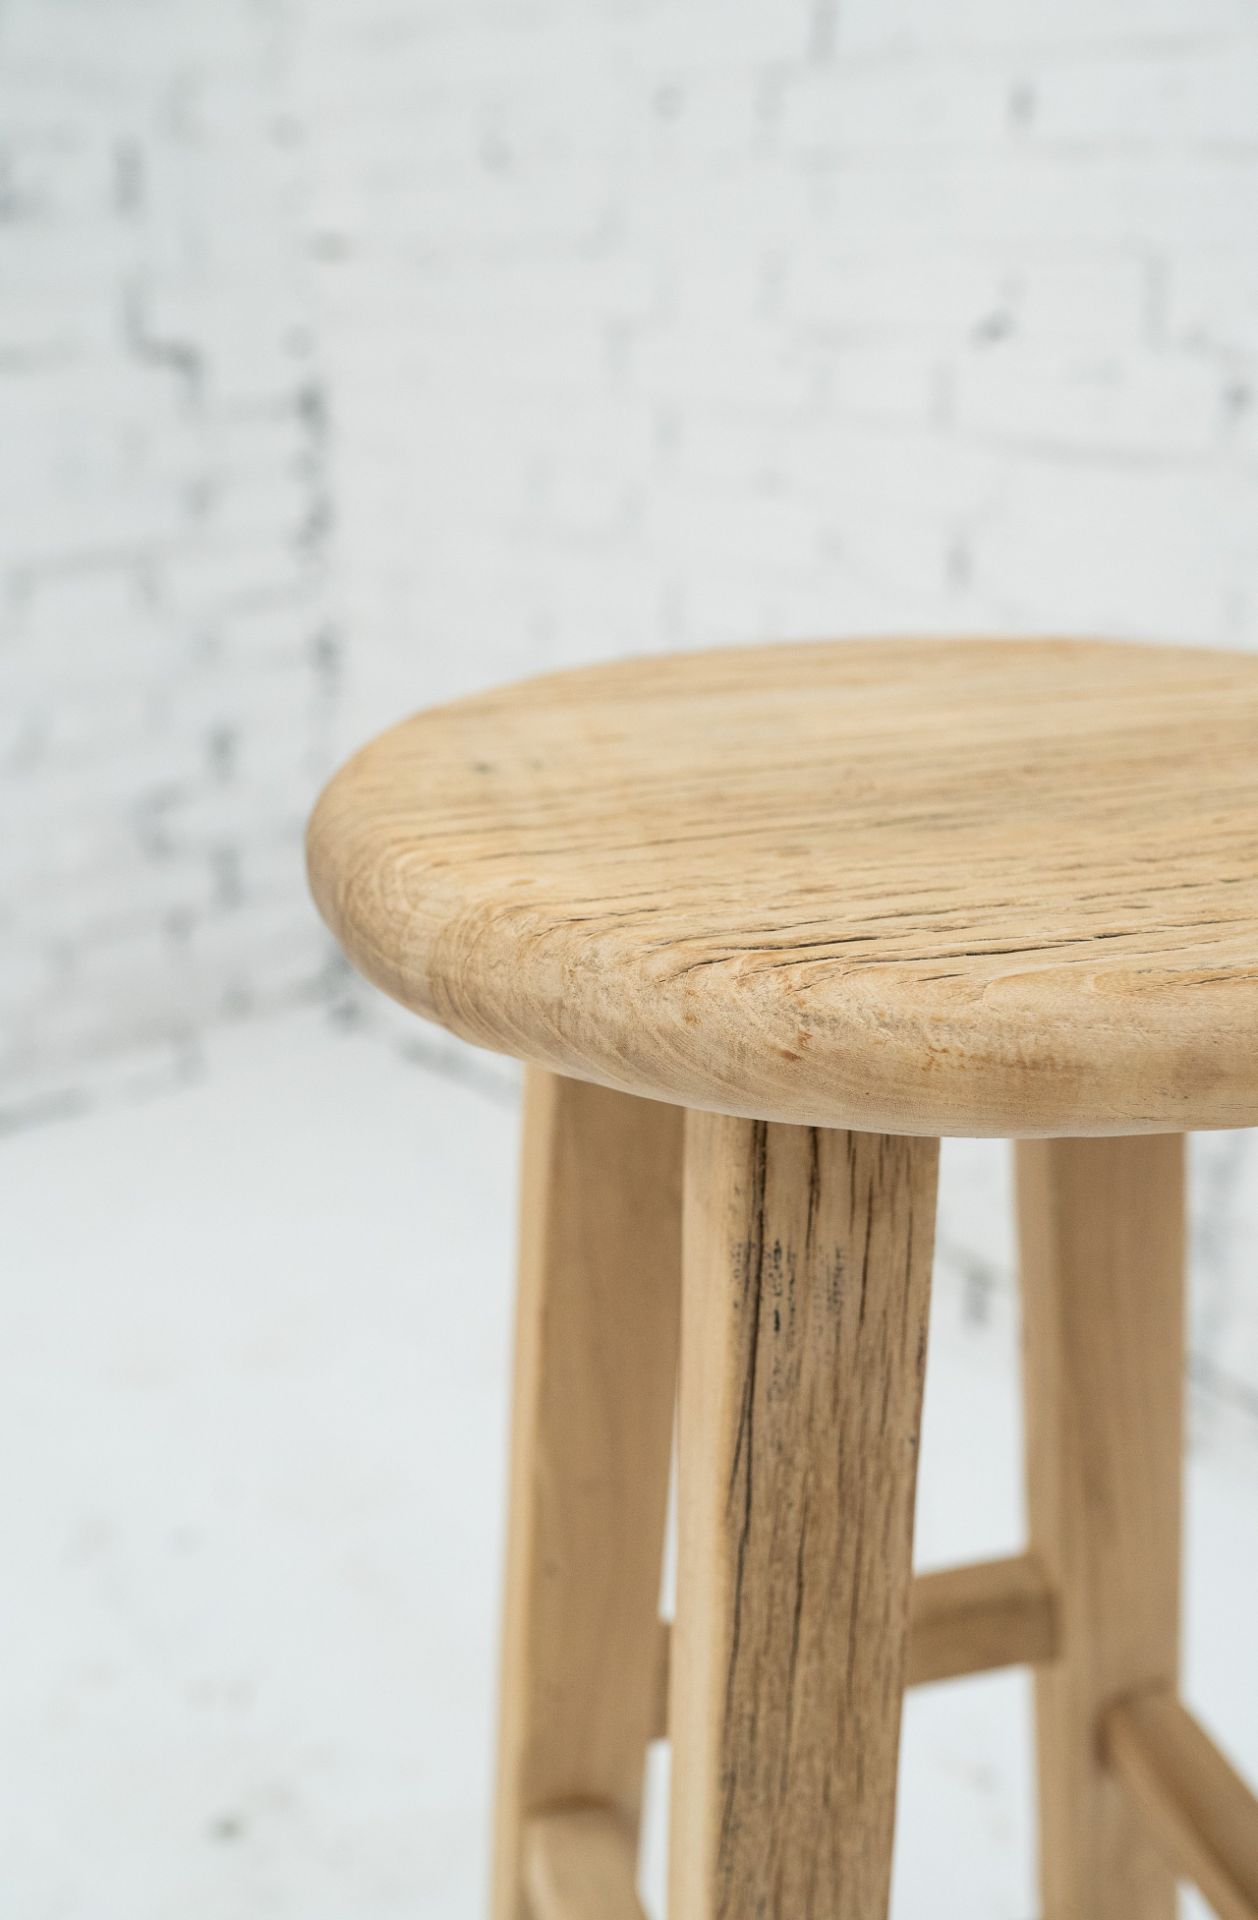 Tall Elm Stool: Stunning wooden bar stools from the Heibei province of China. - Image 3 of 4